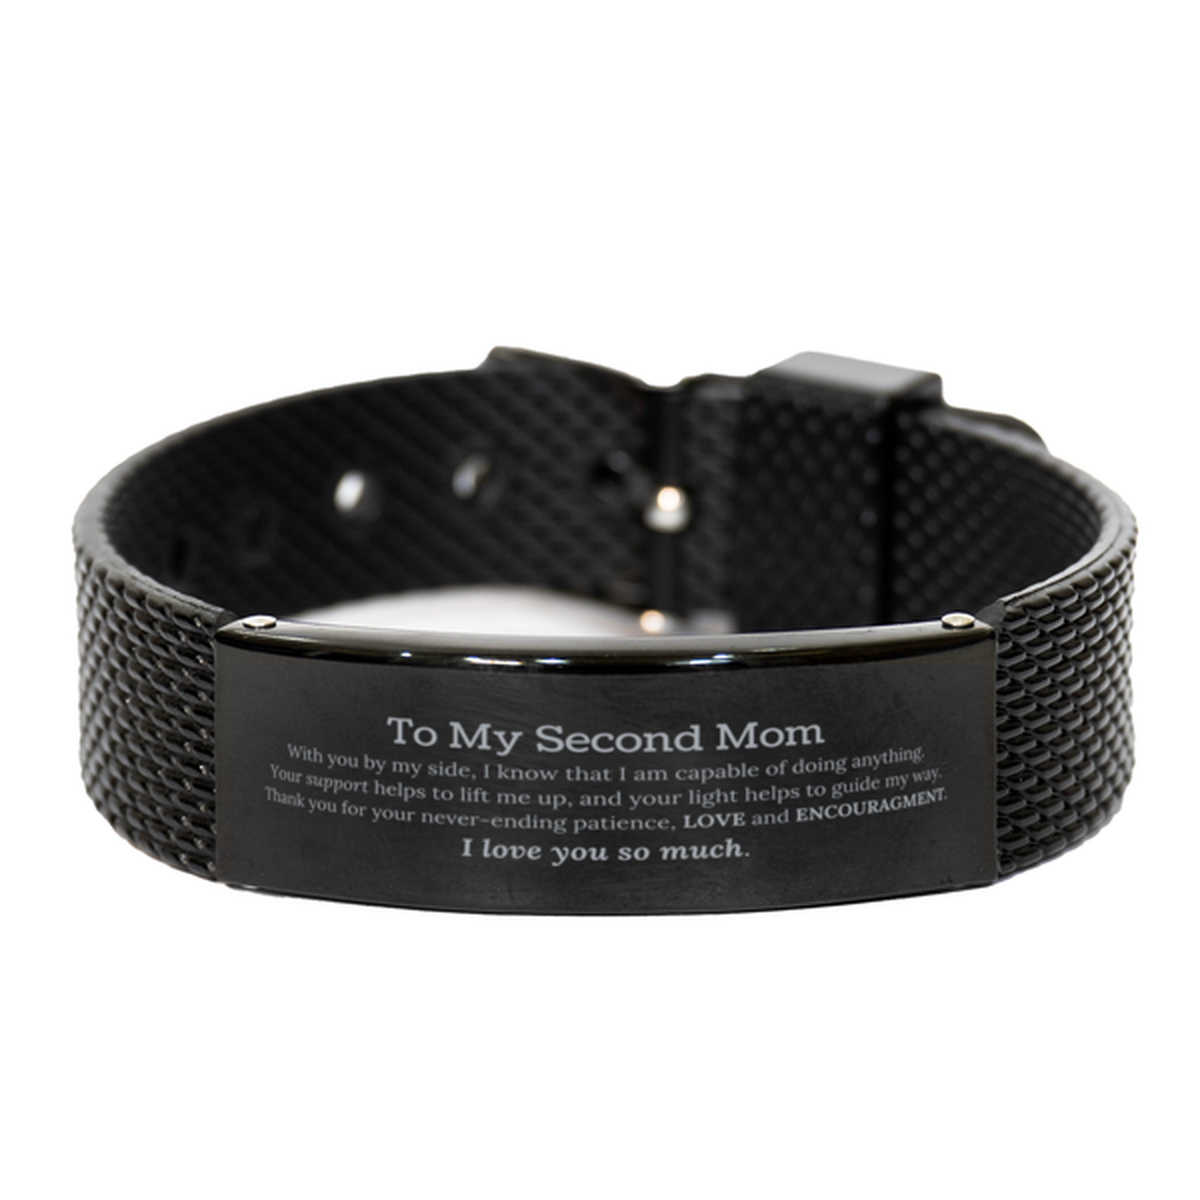 Appreciation Second Mom Black Shark Mesh Bracelet Gifts, To My Second Mom Birthday Christmas Wedding Keepsake Gifts for Second Mom With you by my side, I know that I am capable of doing anything. I love you so much